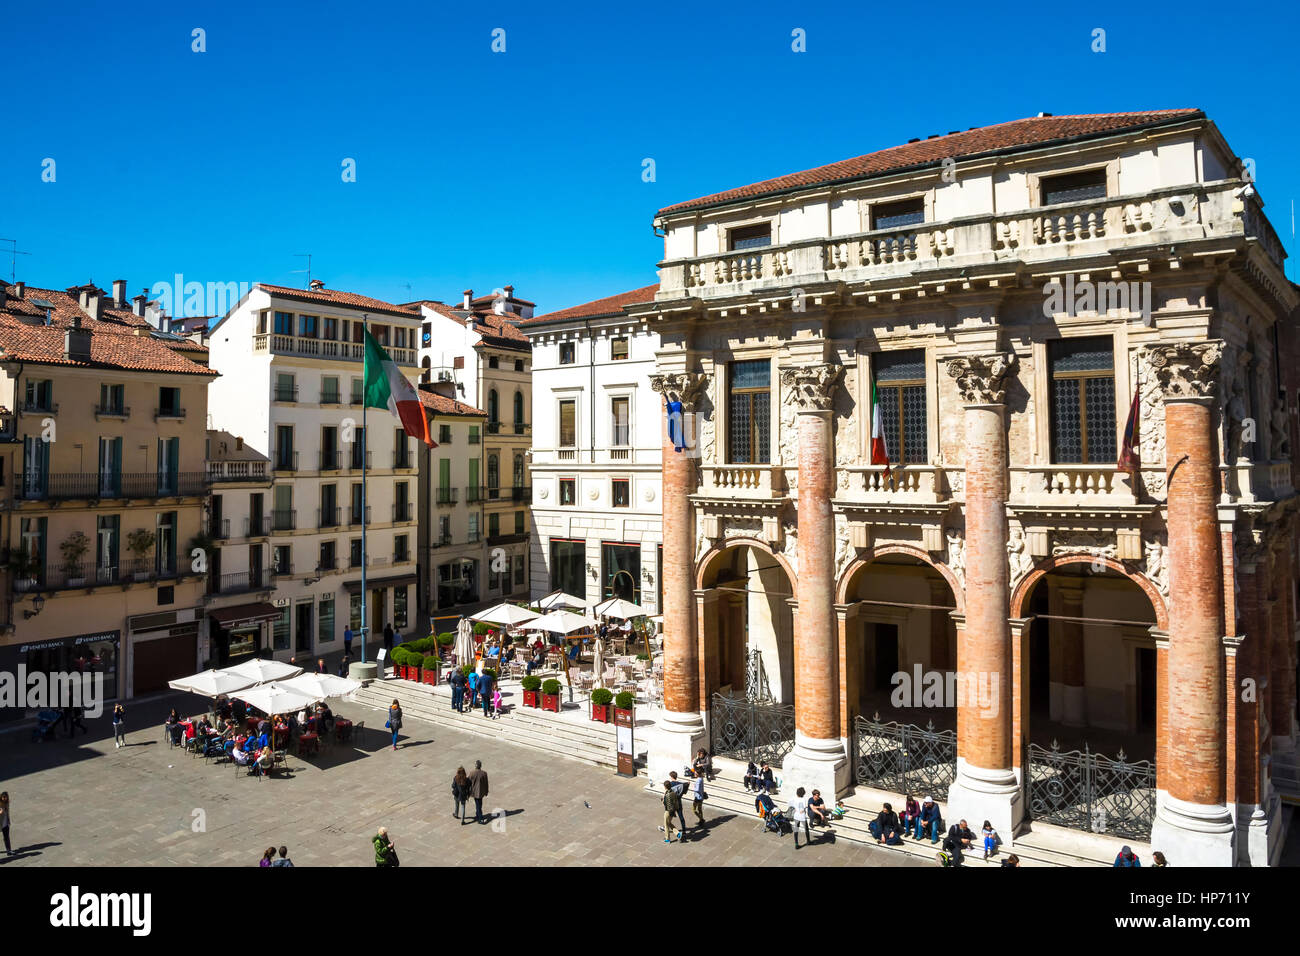 Vicenza,Italy-April 3,2015:people stroll in front of the Capitaniato  lodge in the Vicenza town square .during a sunny day. Stock Photo